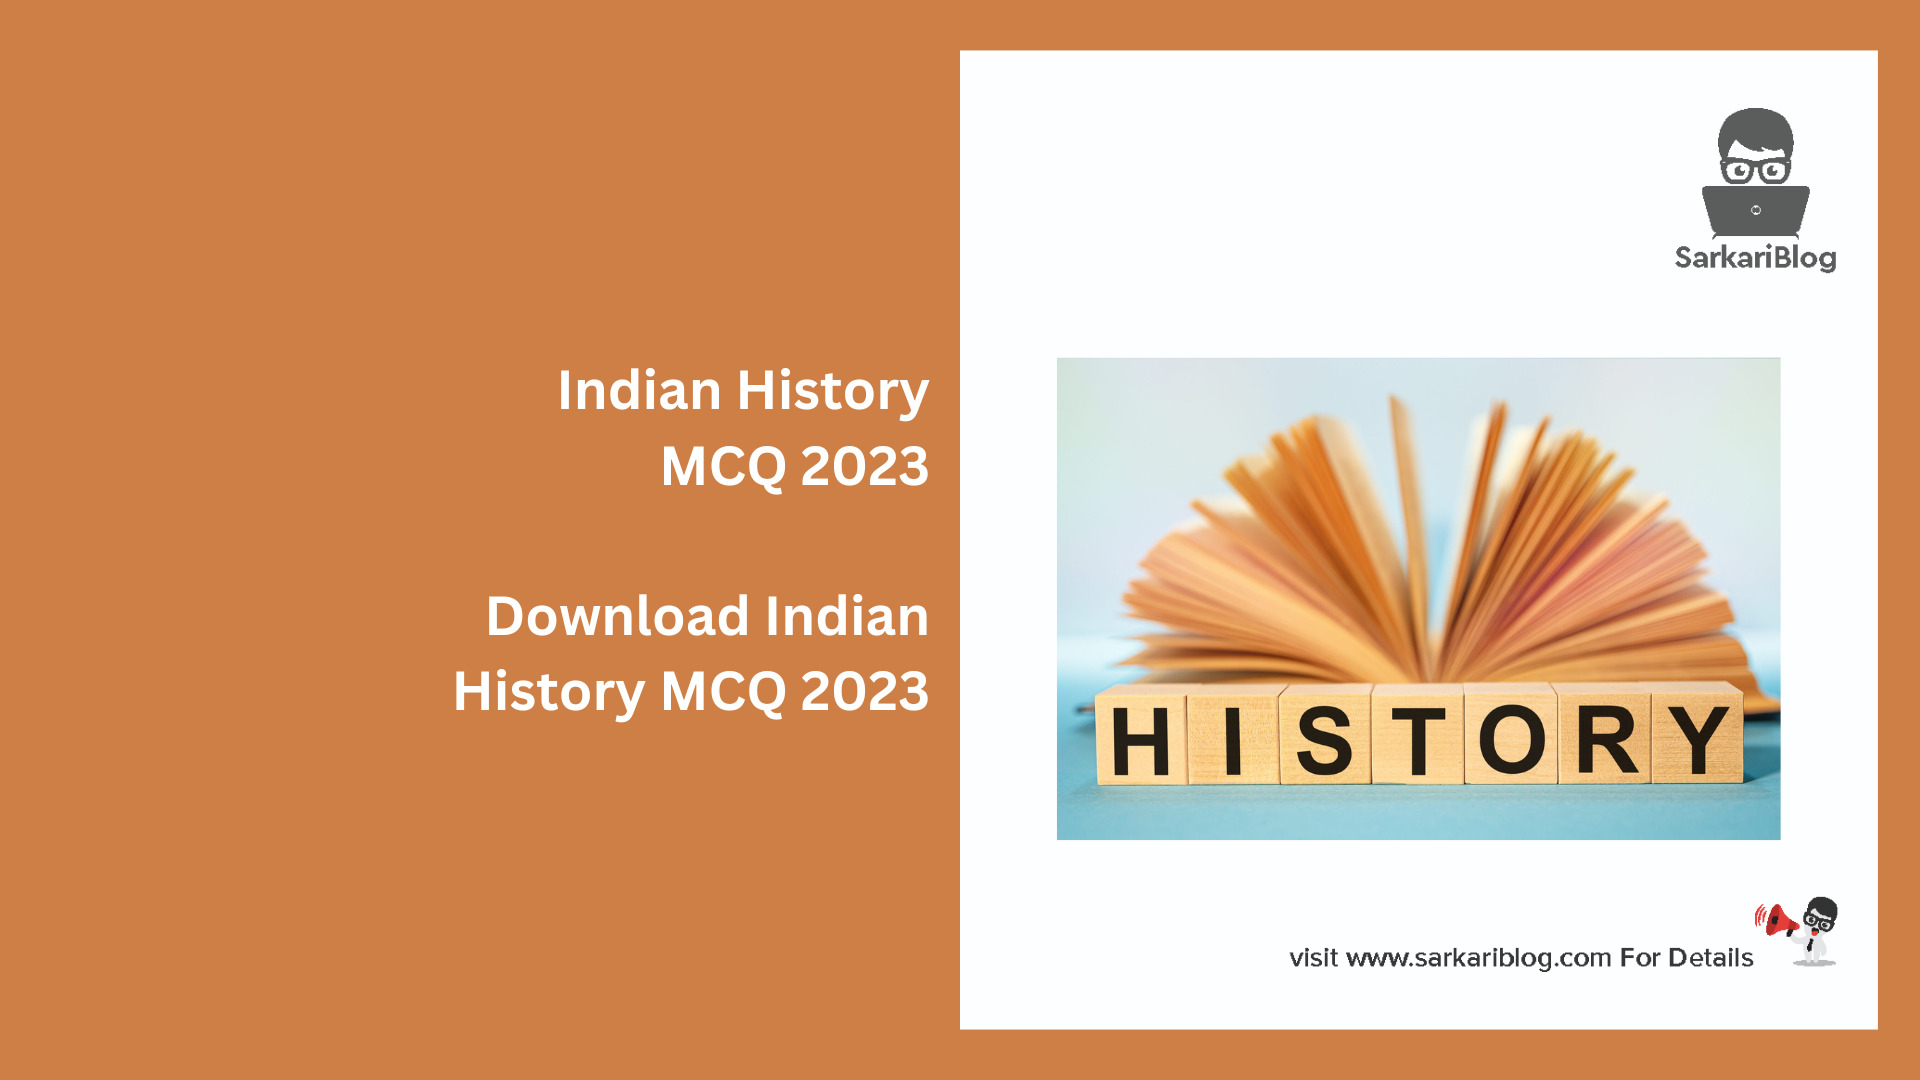 Indian History MCQ 2023